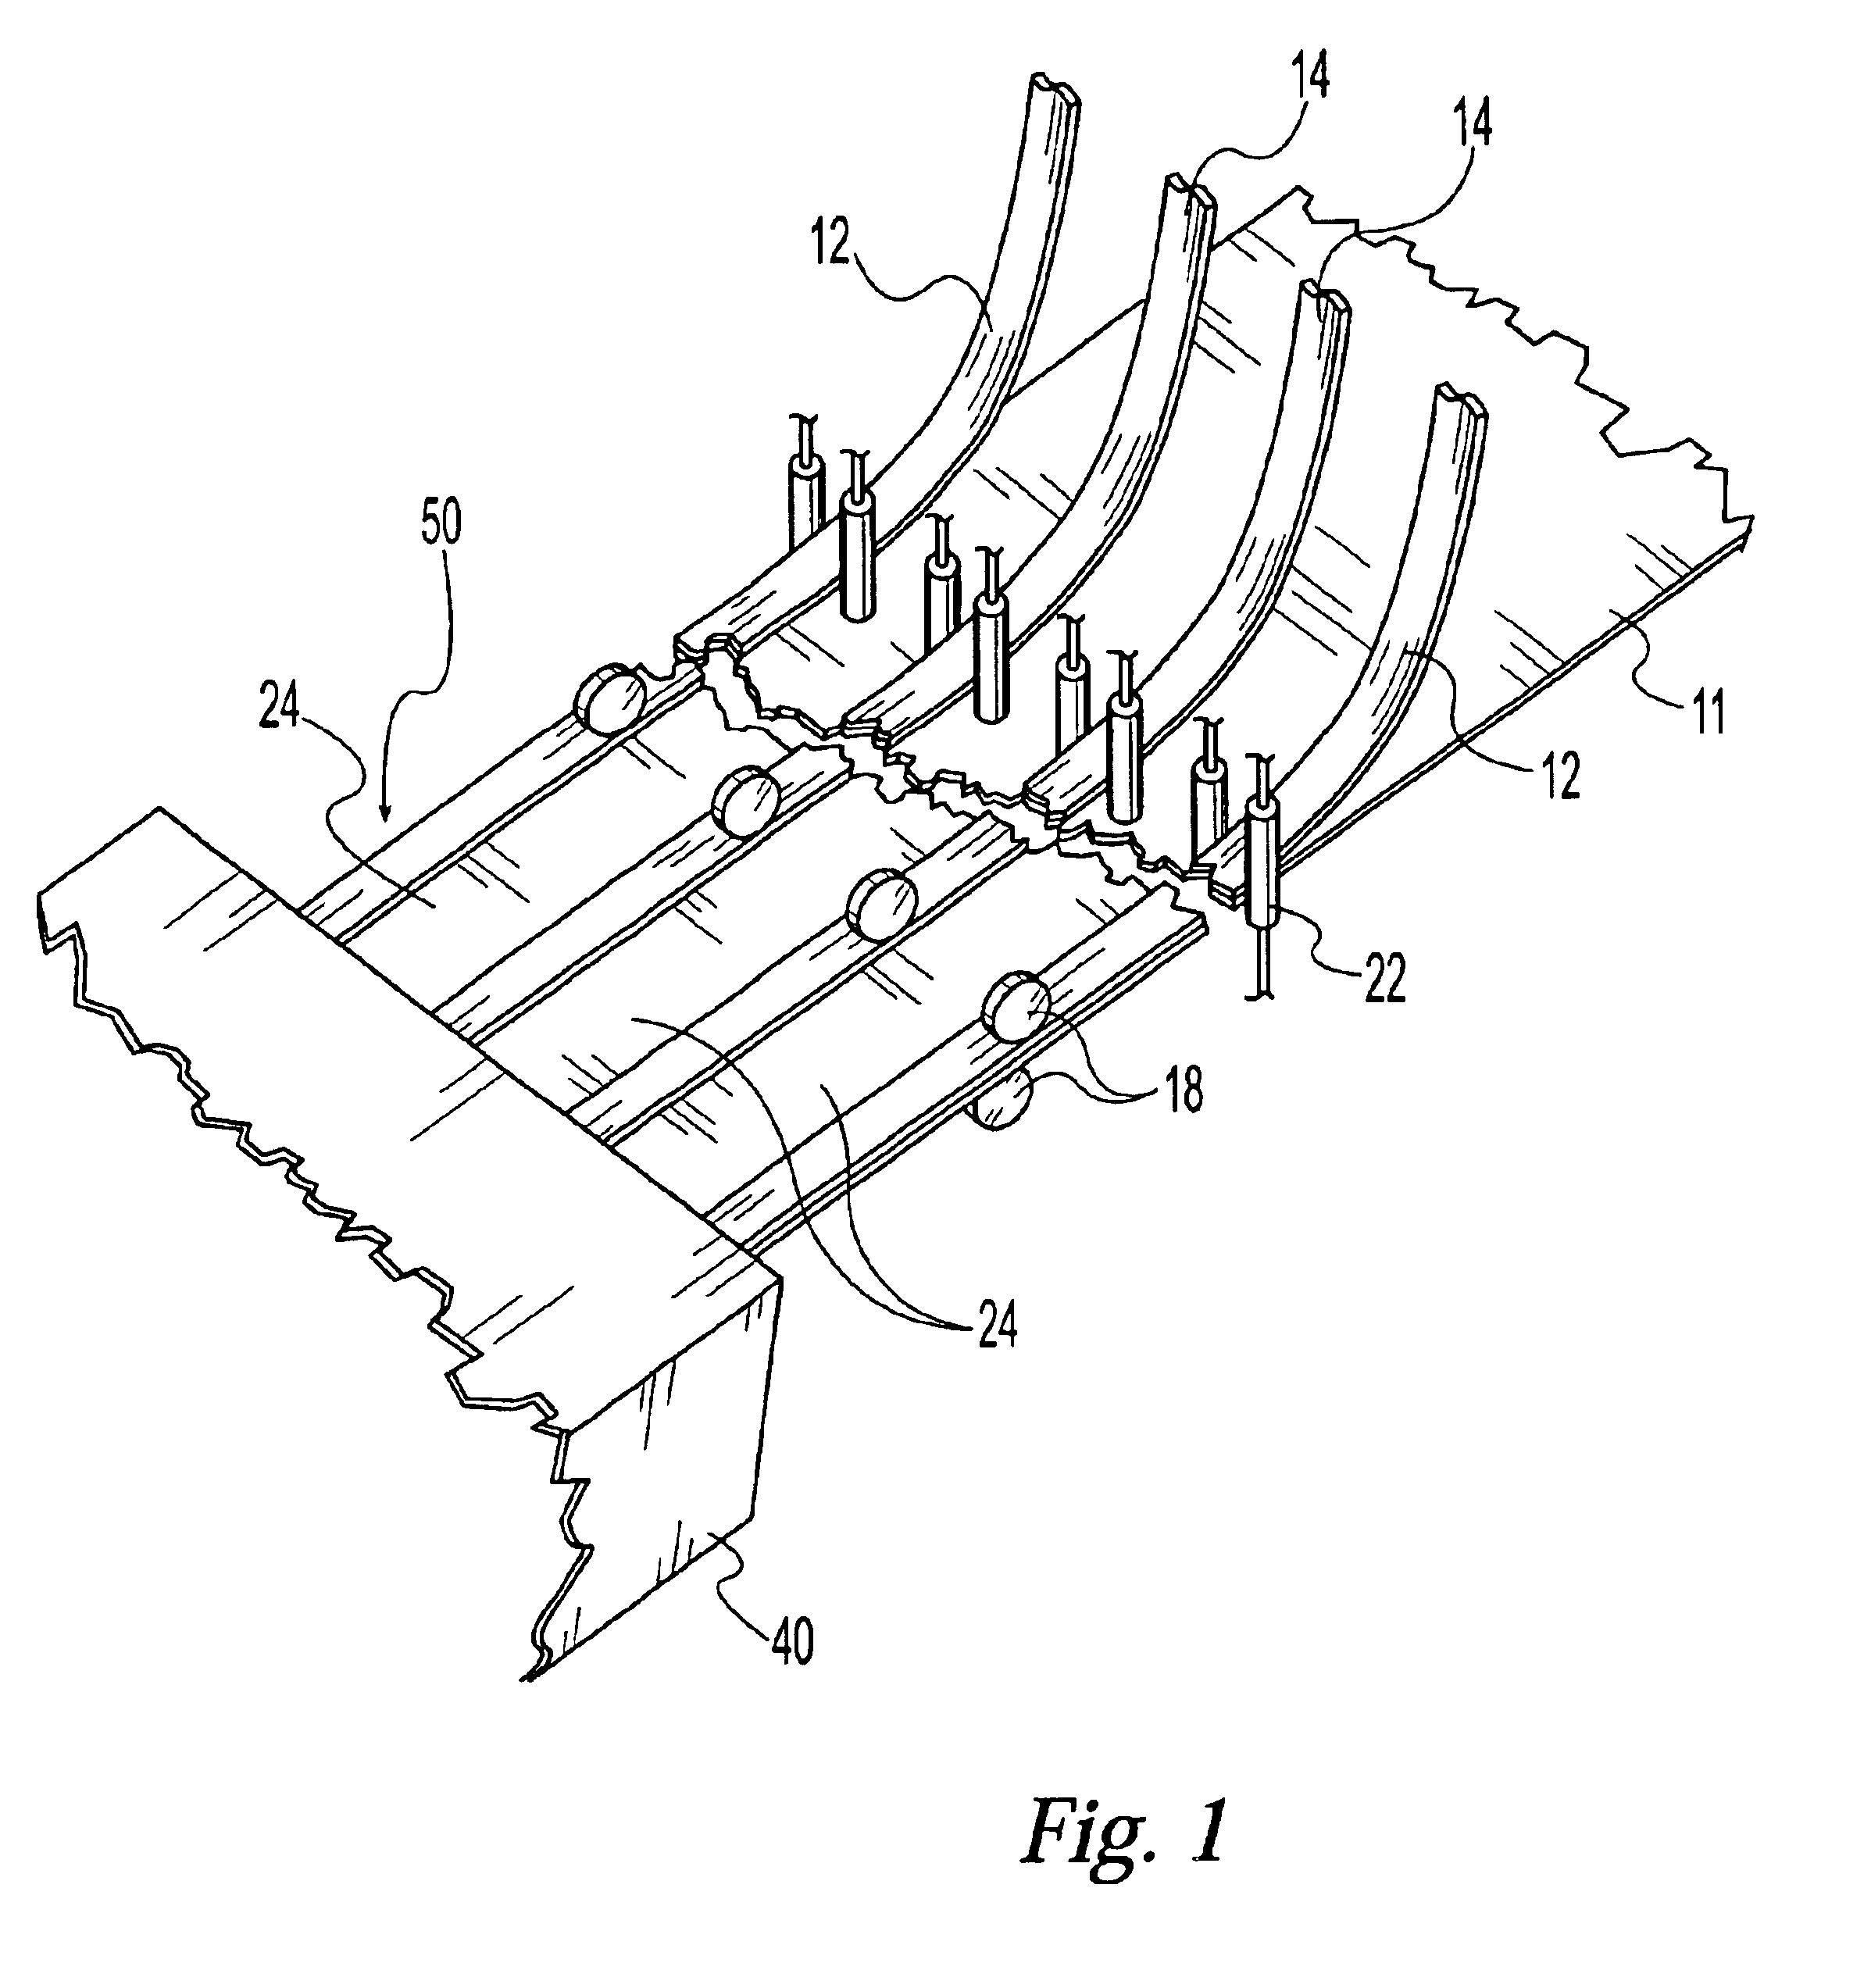 Method of fabricating multi-channel devices and multi-channel devices therefrom